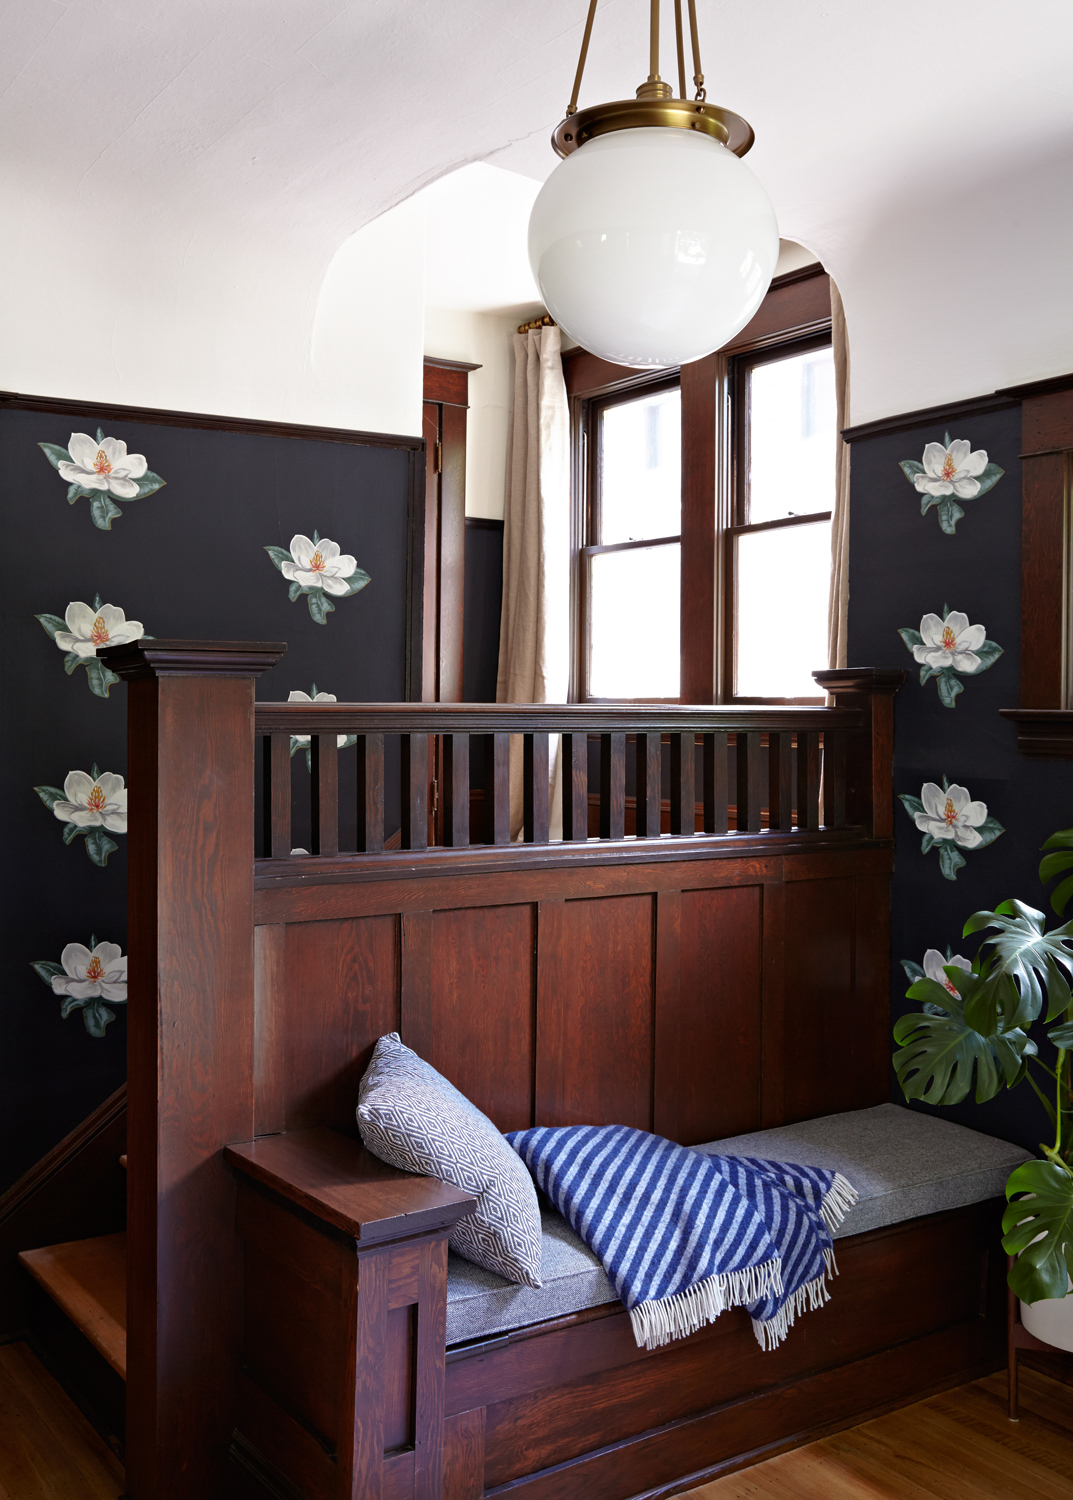 Custom Hand-painted Floral Entry with Built-In Bench | Casework Interior Design | Portland, OR